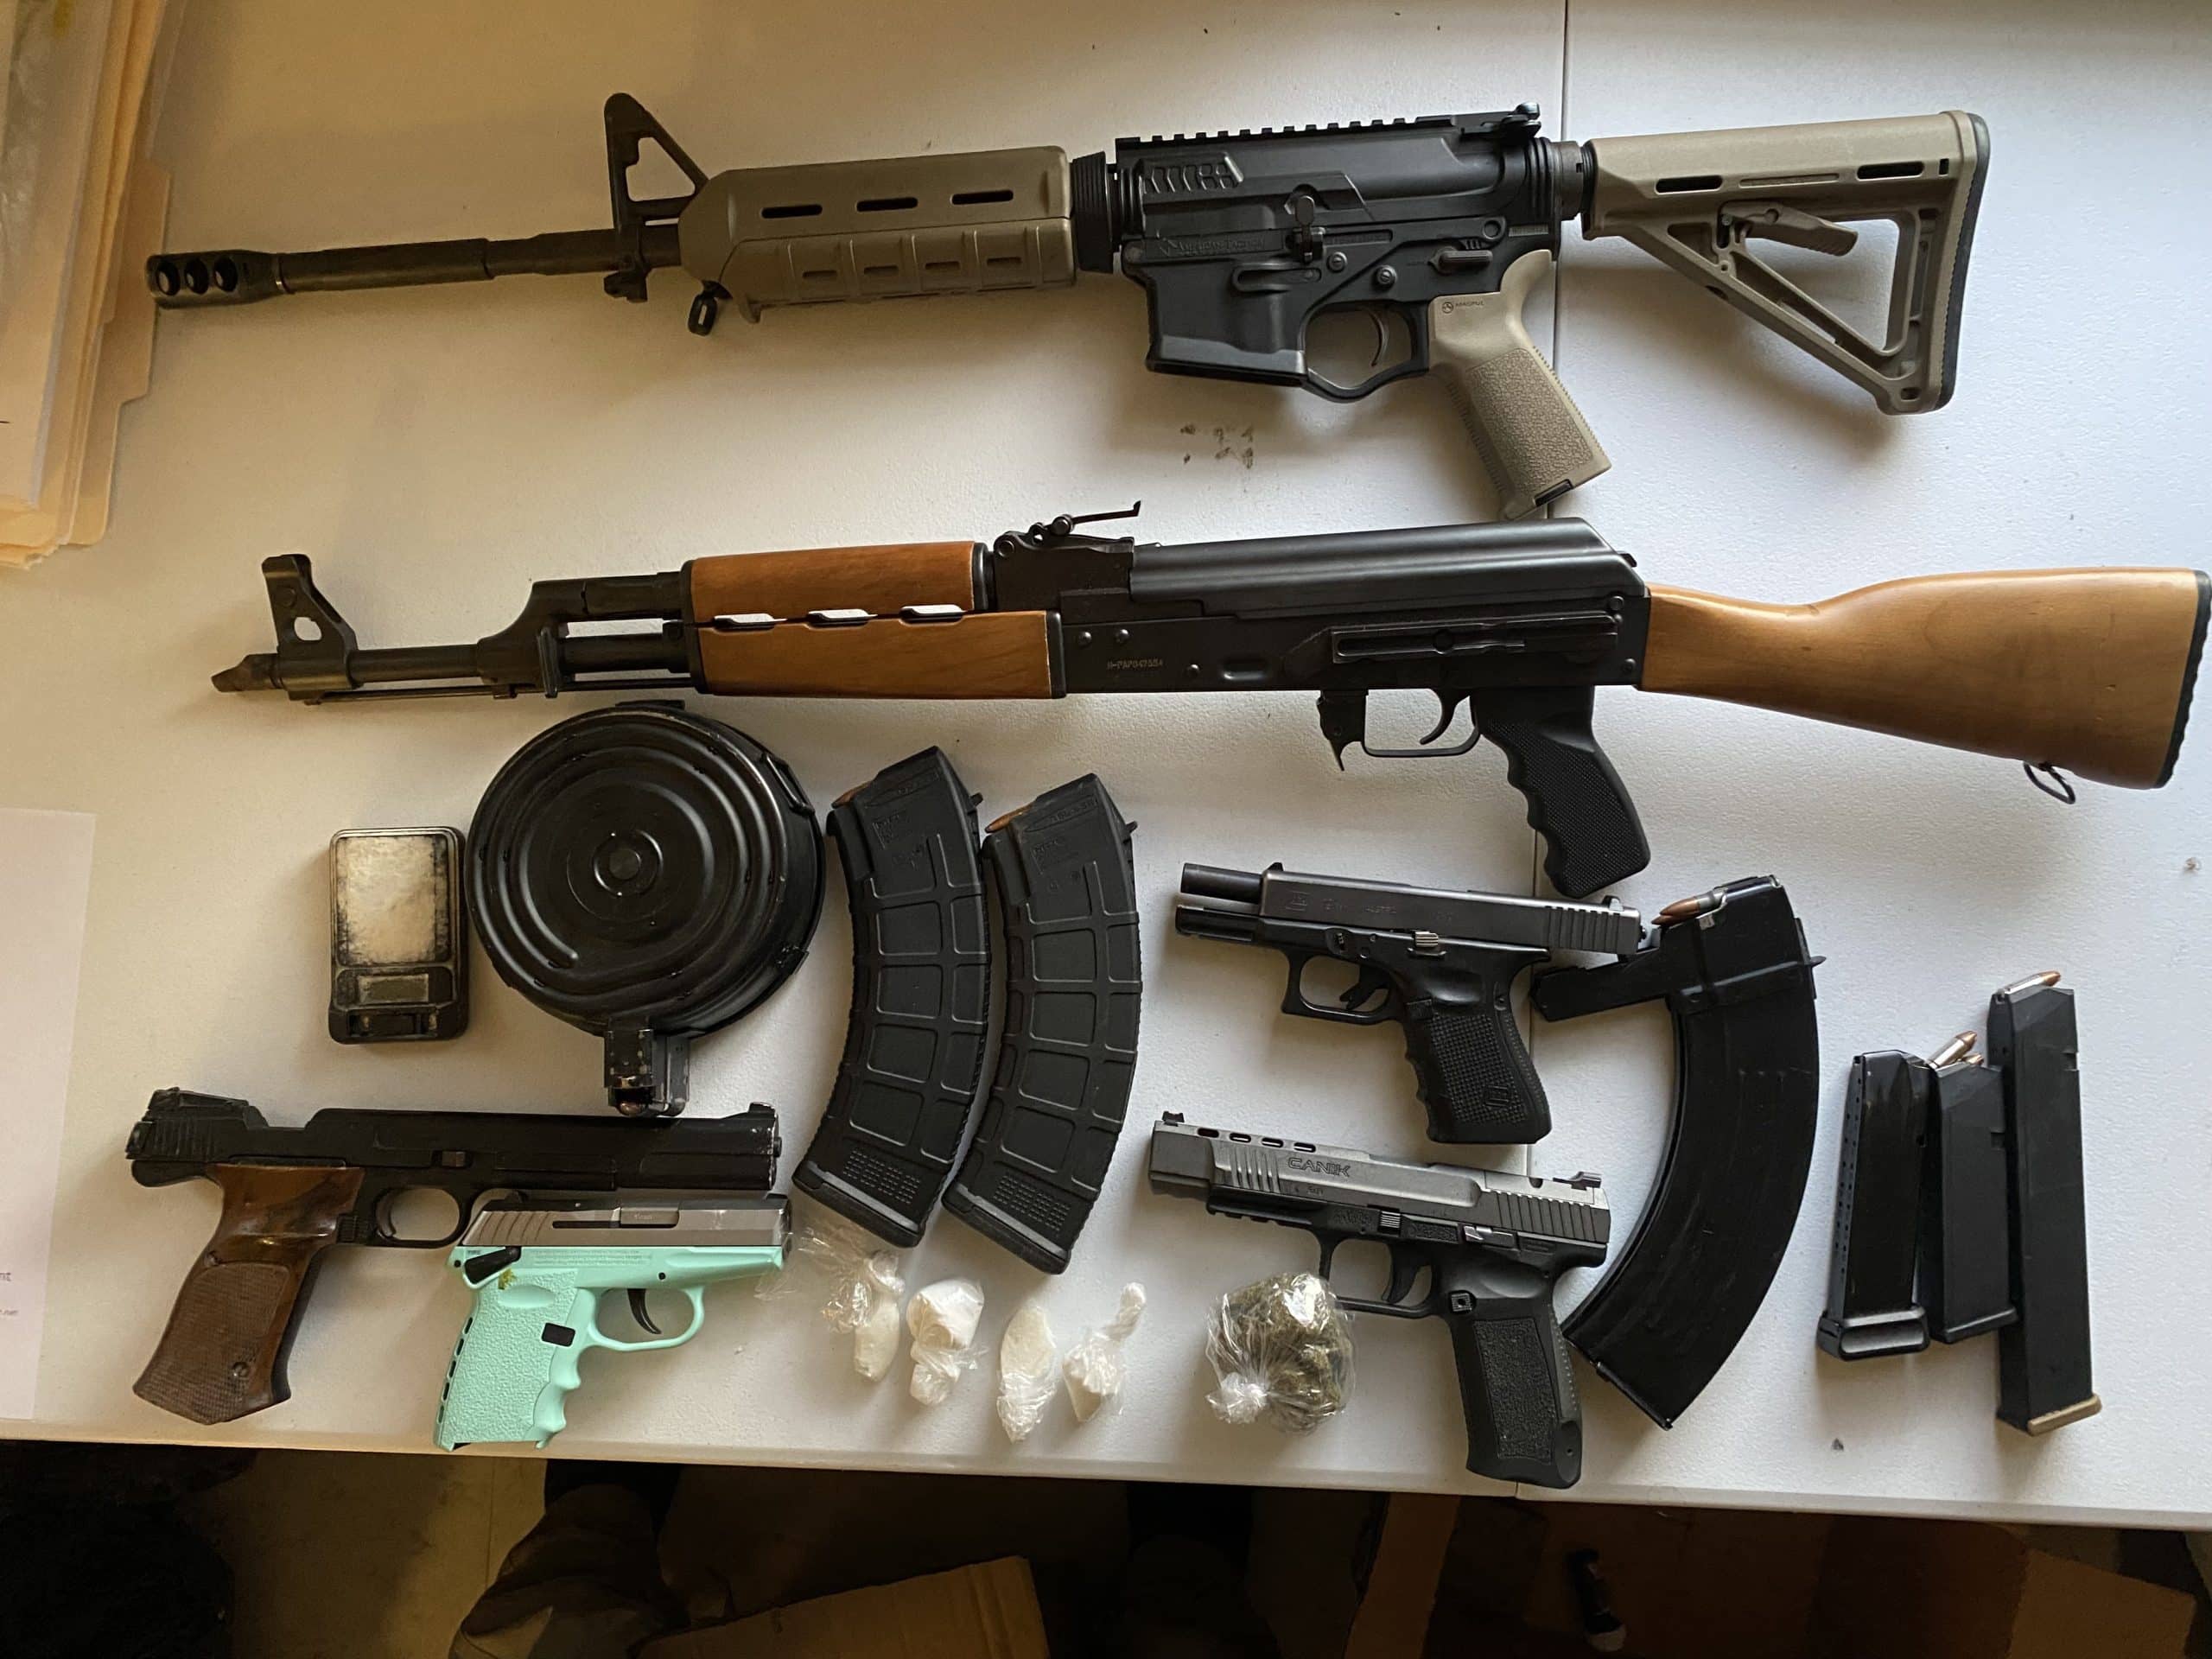 Photos of weapons seized